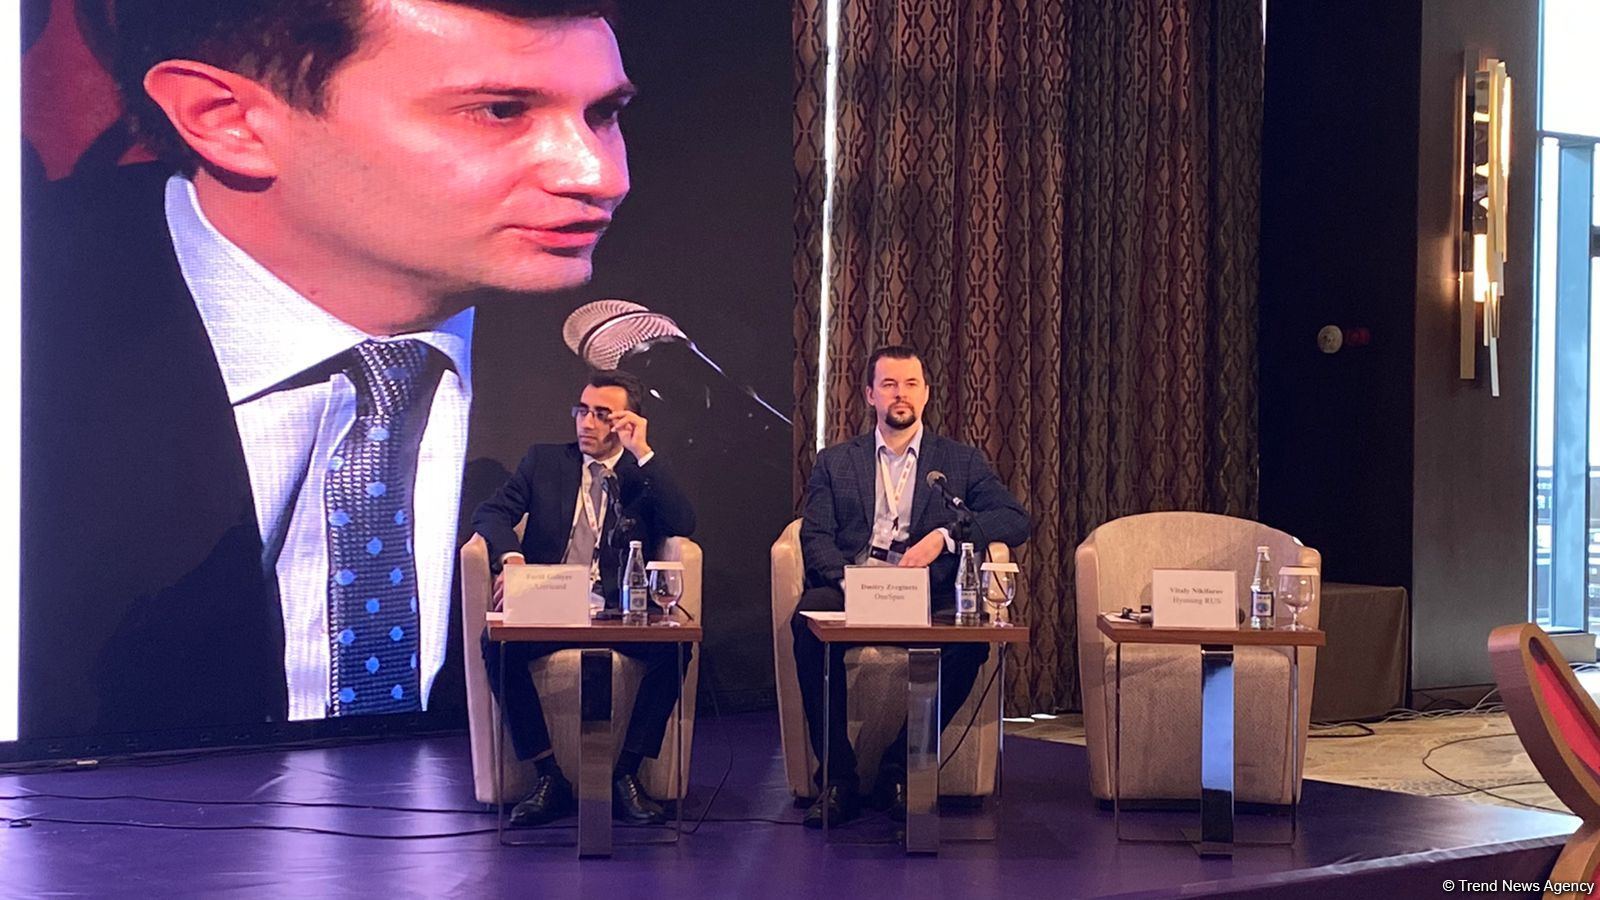 Transition to open, digital banking envisaged in Azerbaijan in next five years – CBA (PHOTO)